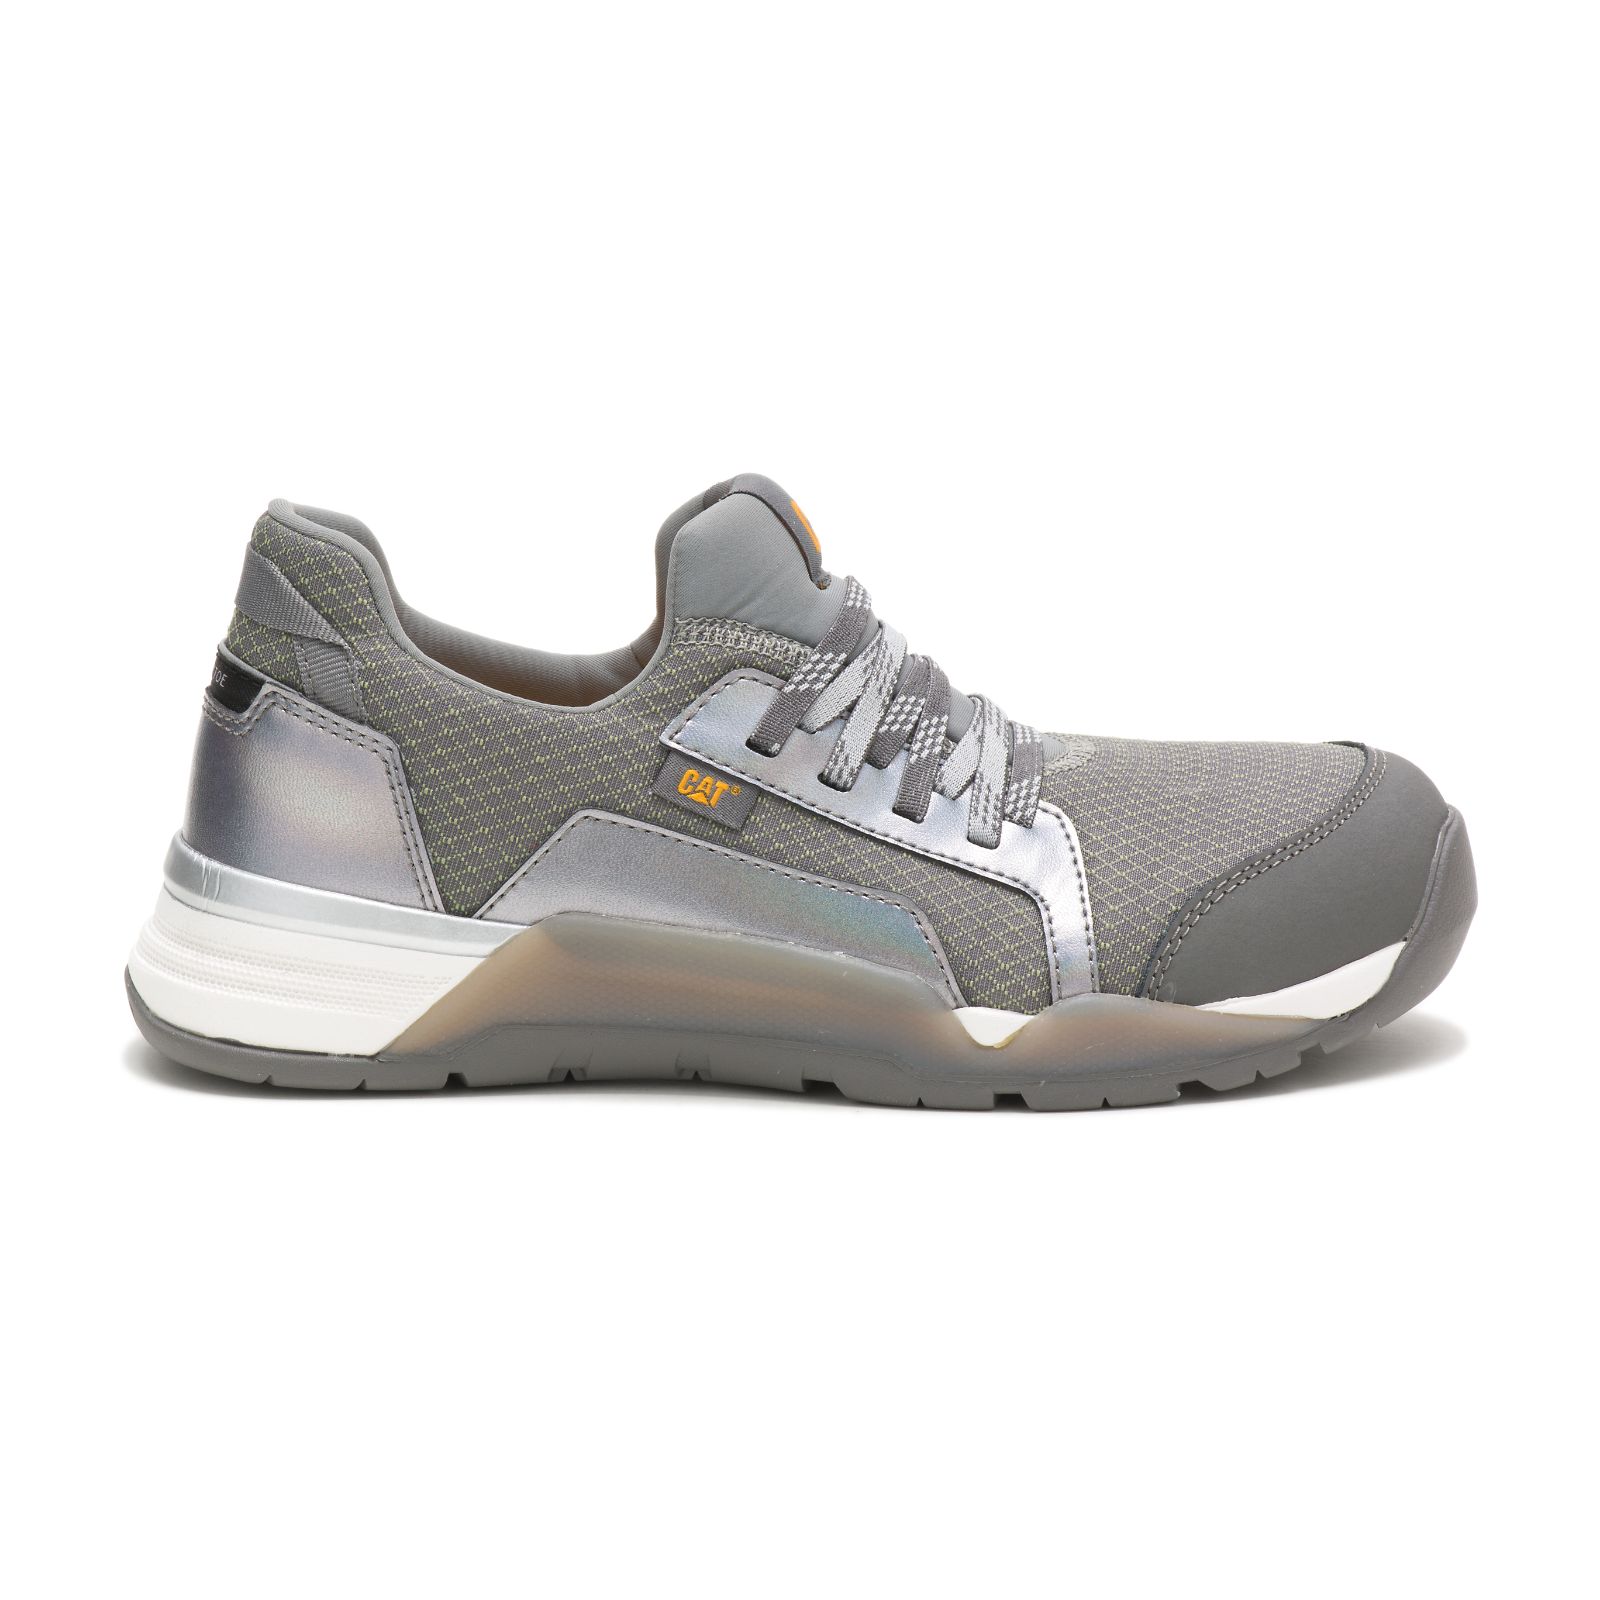 Caterpillar Sprint Textile Alloy Toe Philippines - Womens Trainers - Grey 86241FPSH